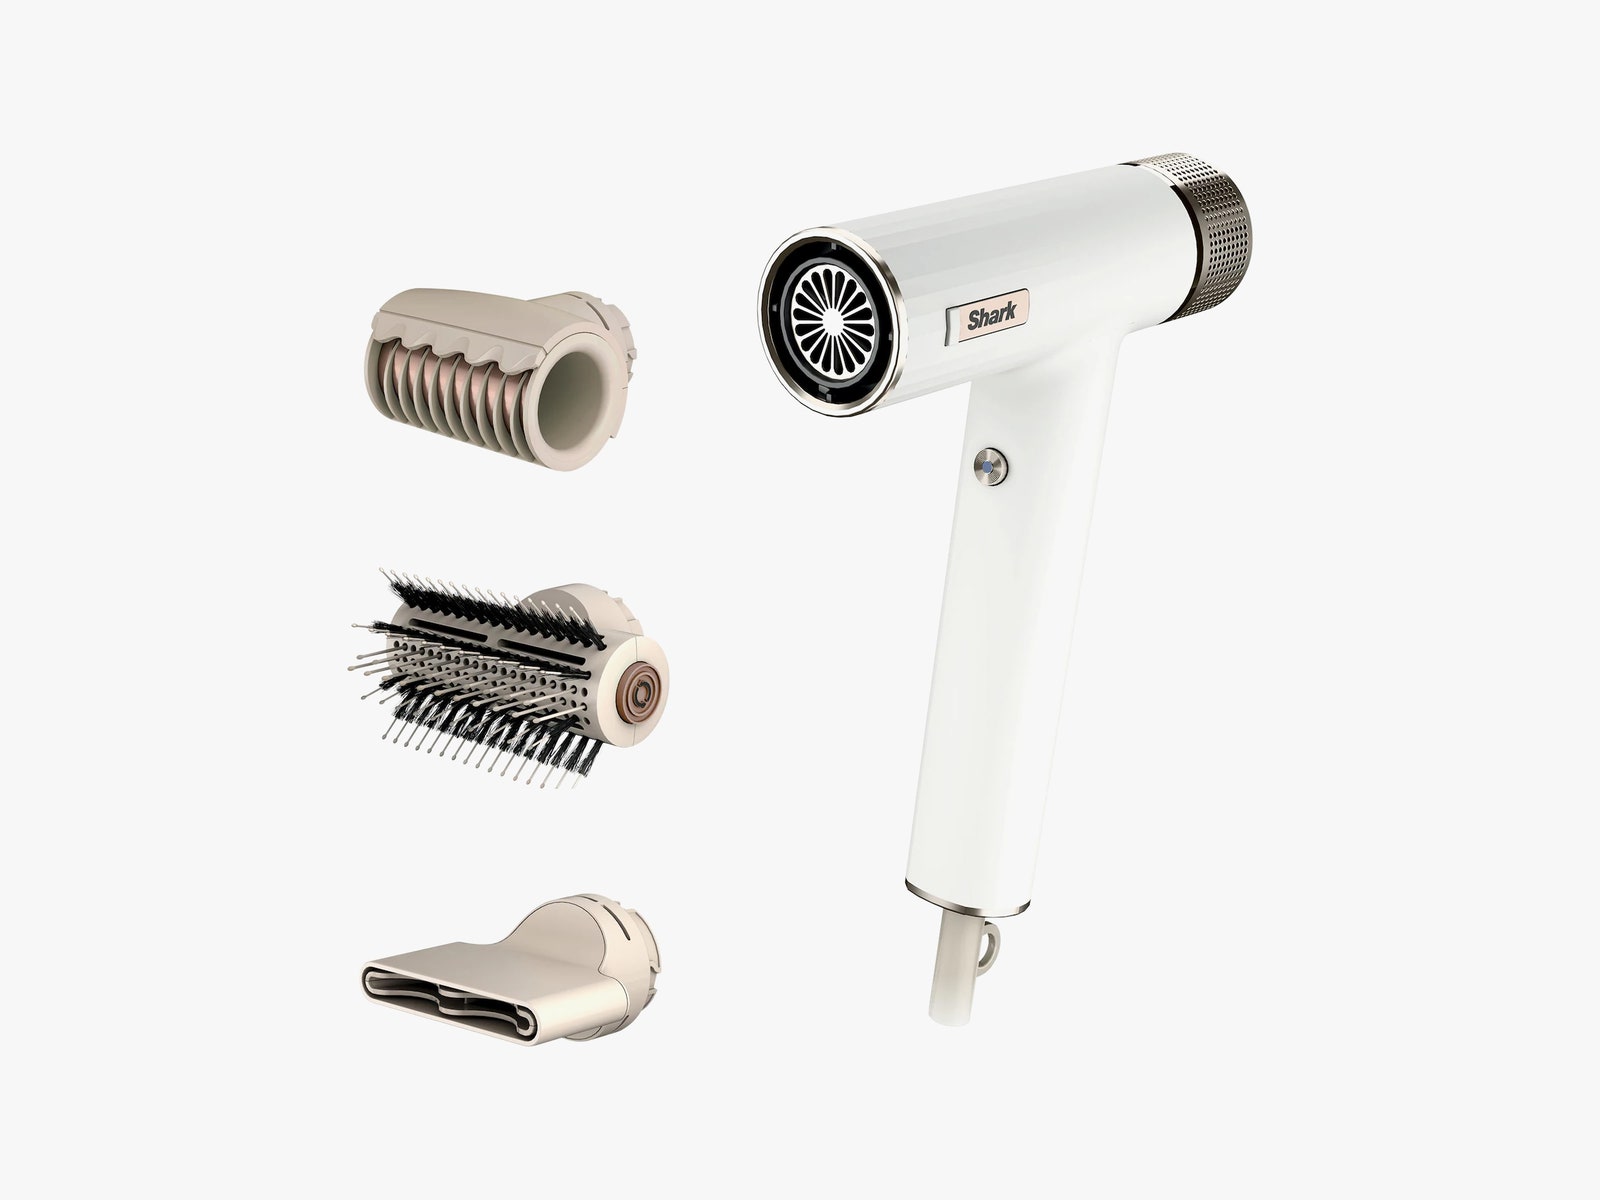 White hair dryer on the right with additional end piece accessories on the left